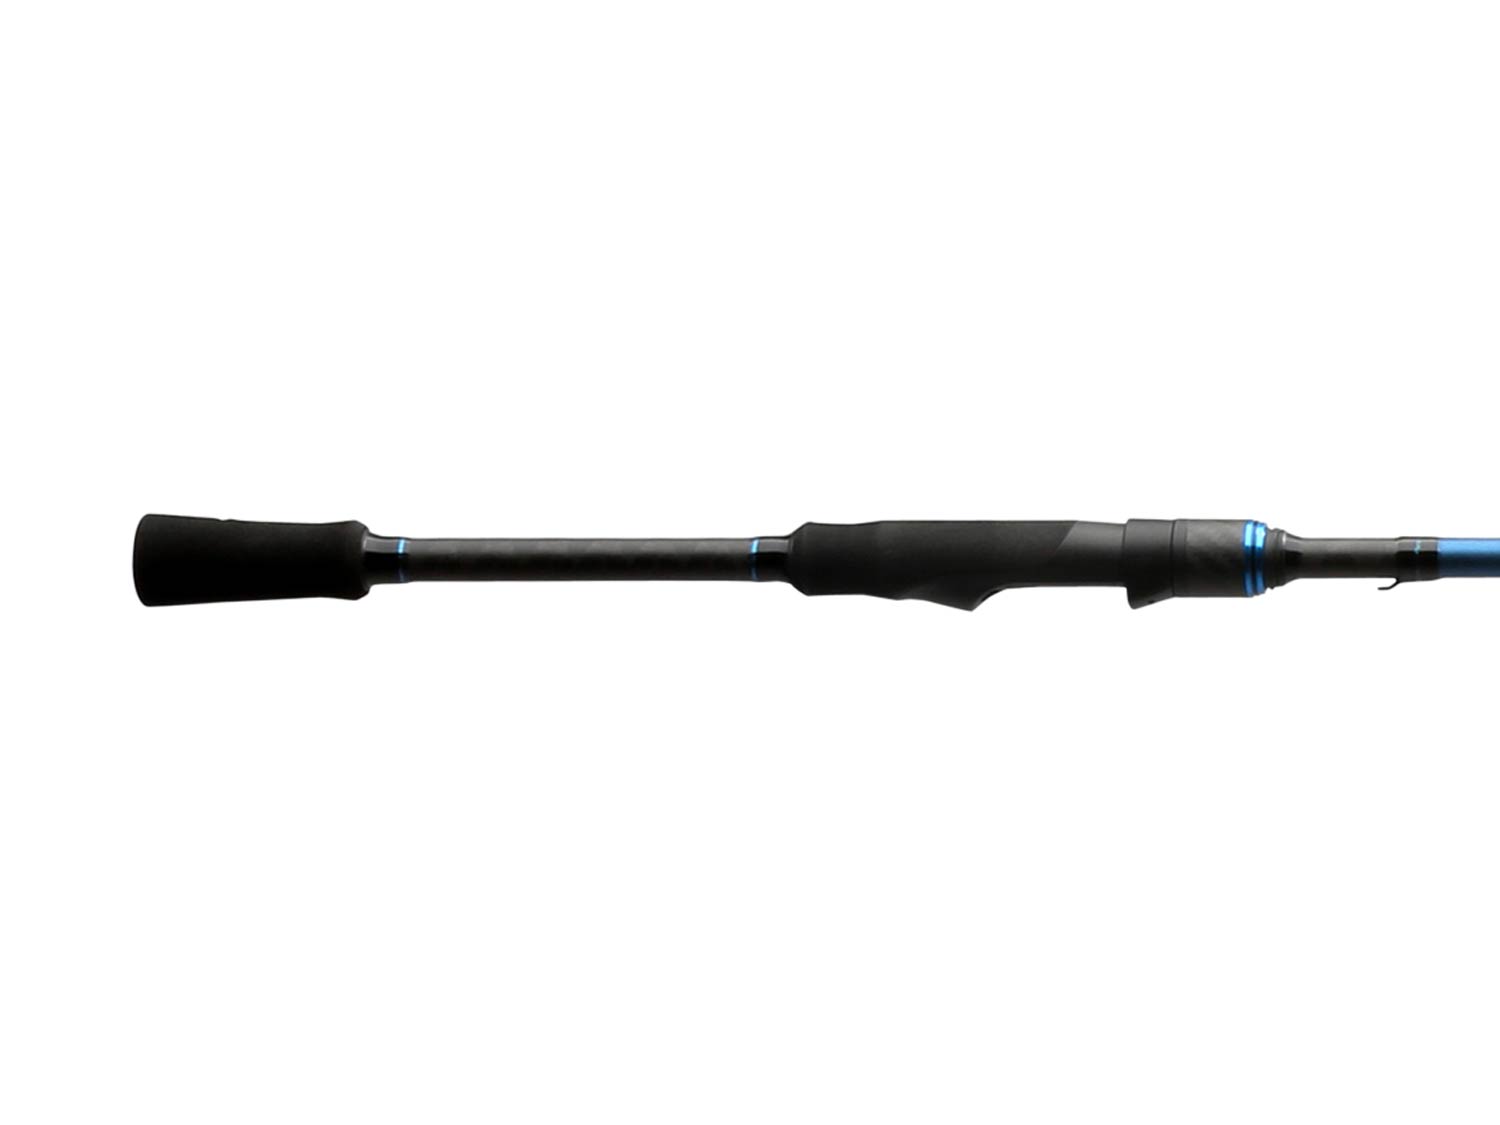 Shimano SLX A Spinning Rod, 7' Length, Medium Power, Extra Fast Action -  730482, Spinning Rods at Sportsman's Guide